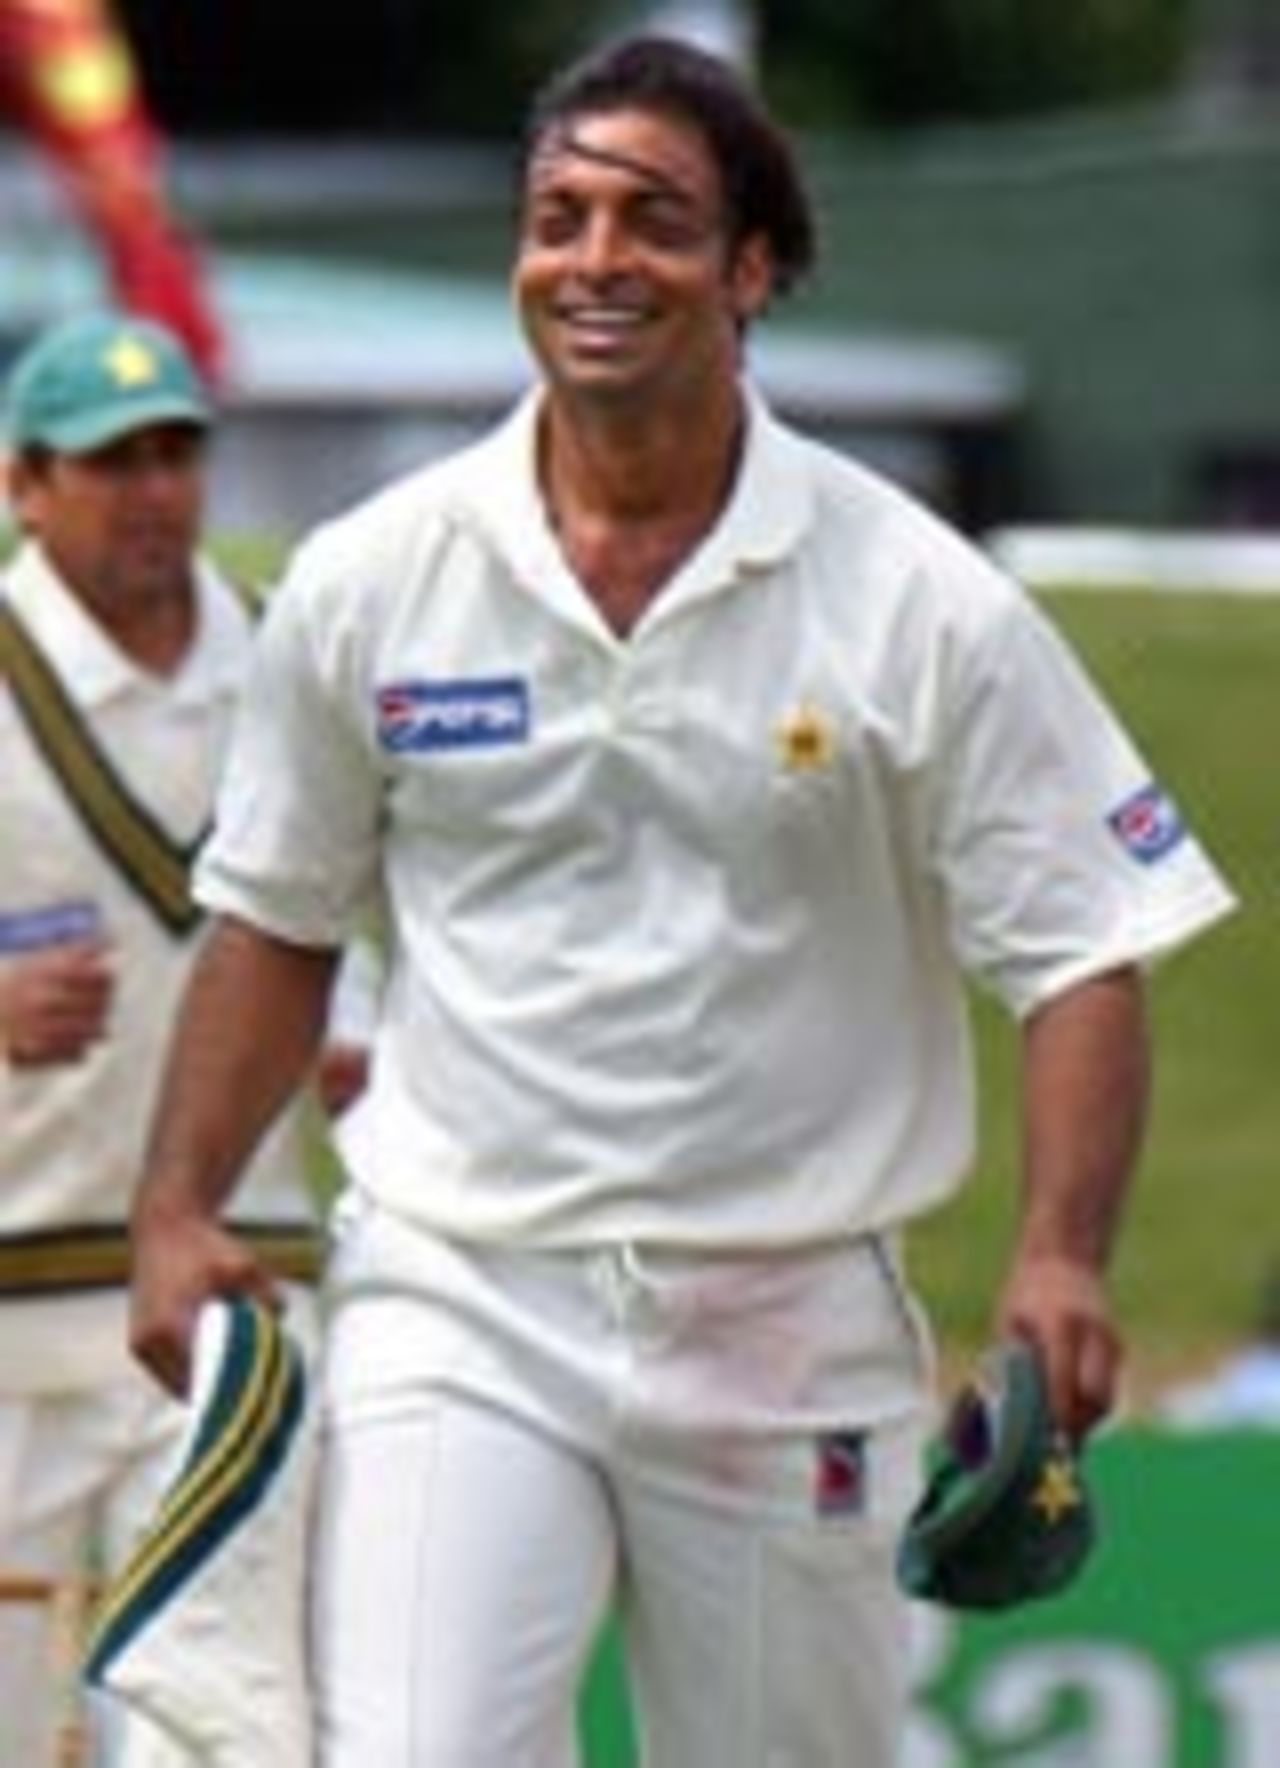 Shoaib Akhtar smiling contentedly after destroying New Zealand, New Zealand v Pakistan, 2nd Test, Wellington, 4th day, December 29, 2003